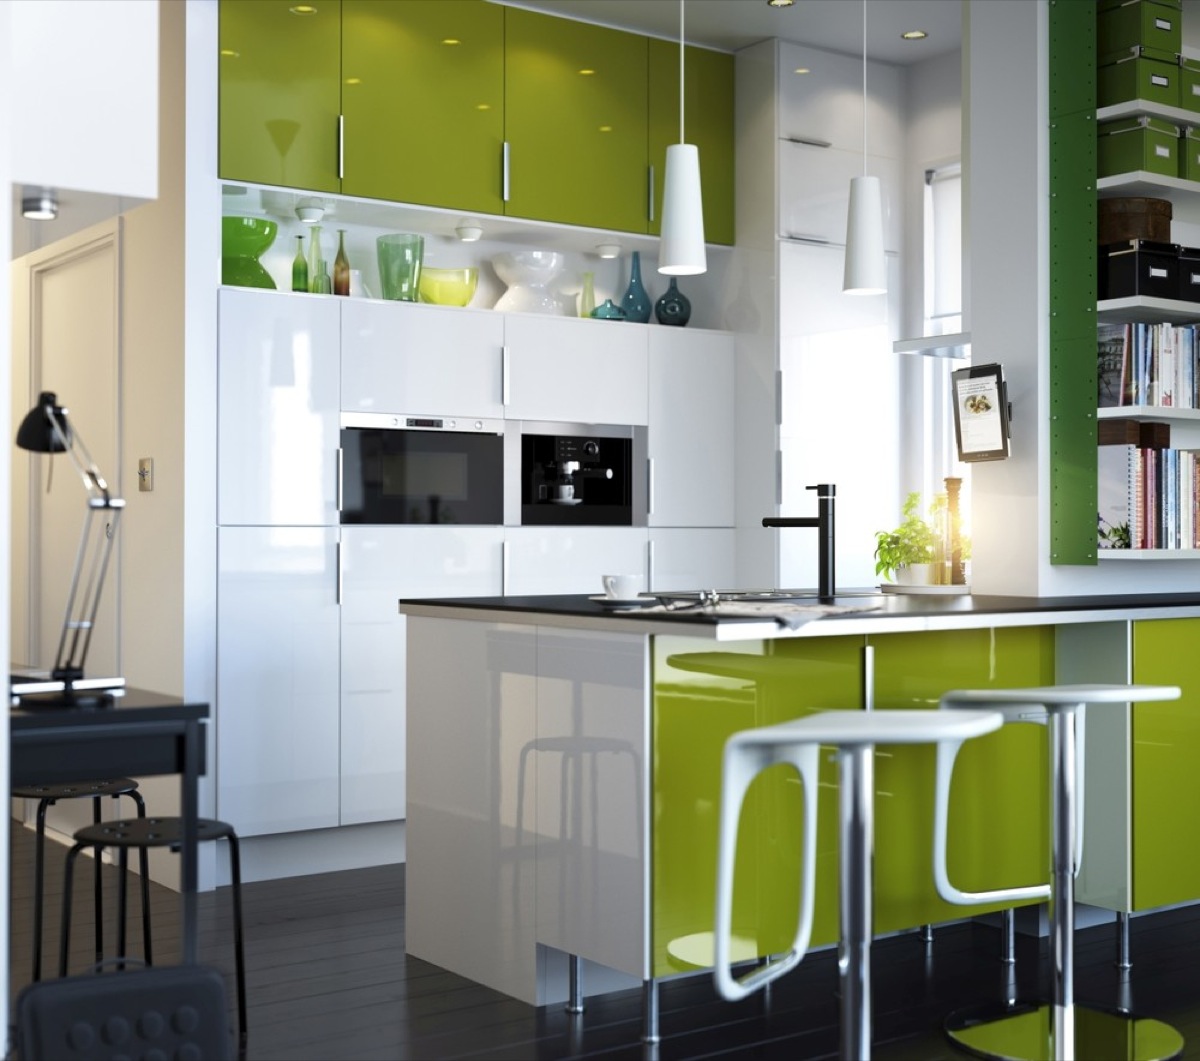 Kitchen with white and green furniture